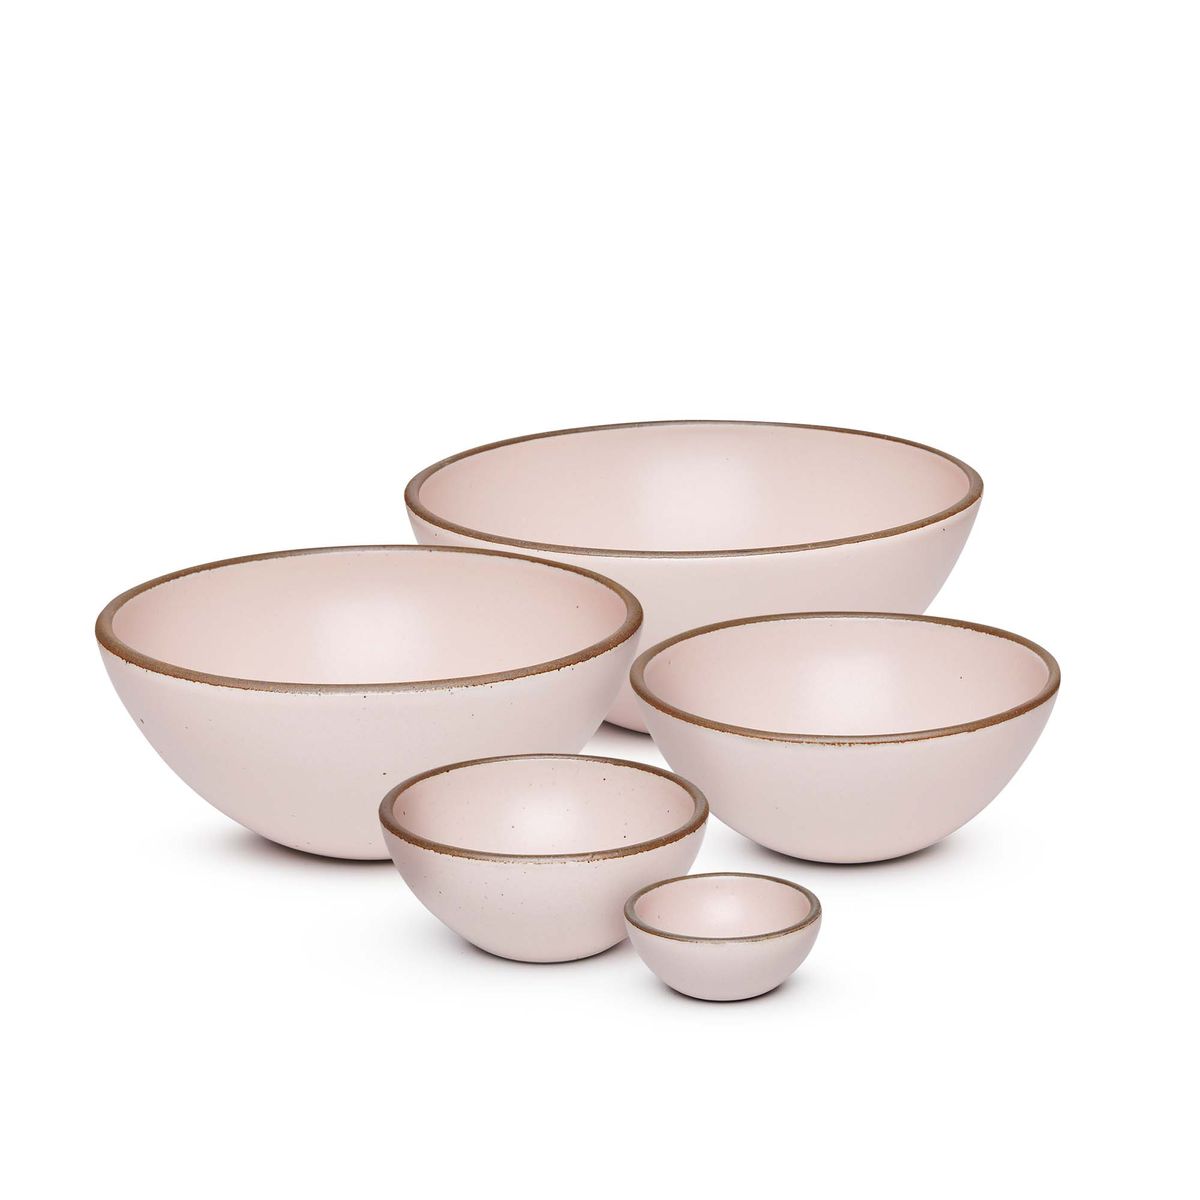 A bitty bowl, ice cream bowl, soup bowl, popcorn bowl, and mixing bowl paired together in a soft light pink color featuring iron speckles